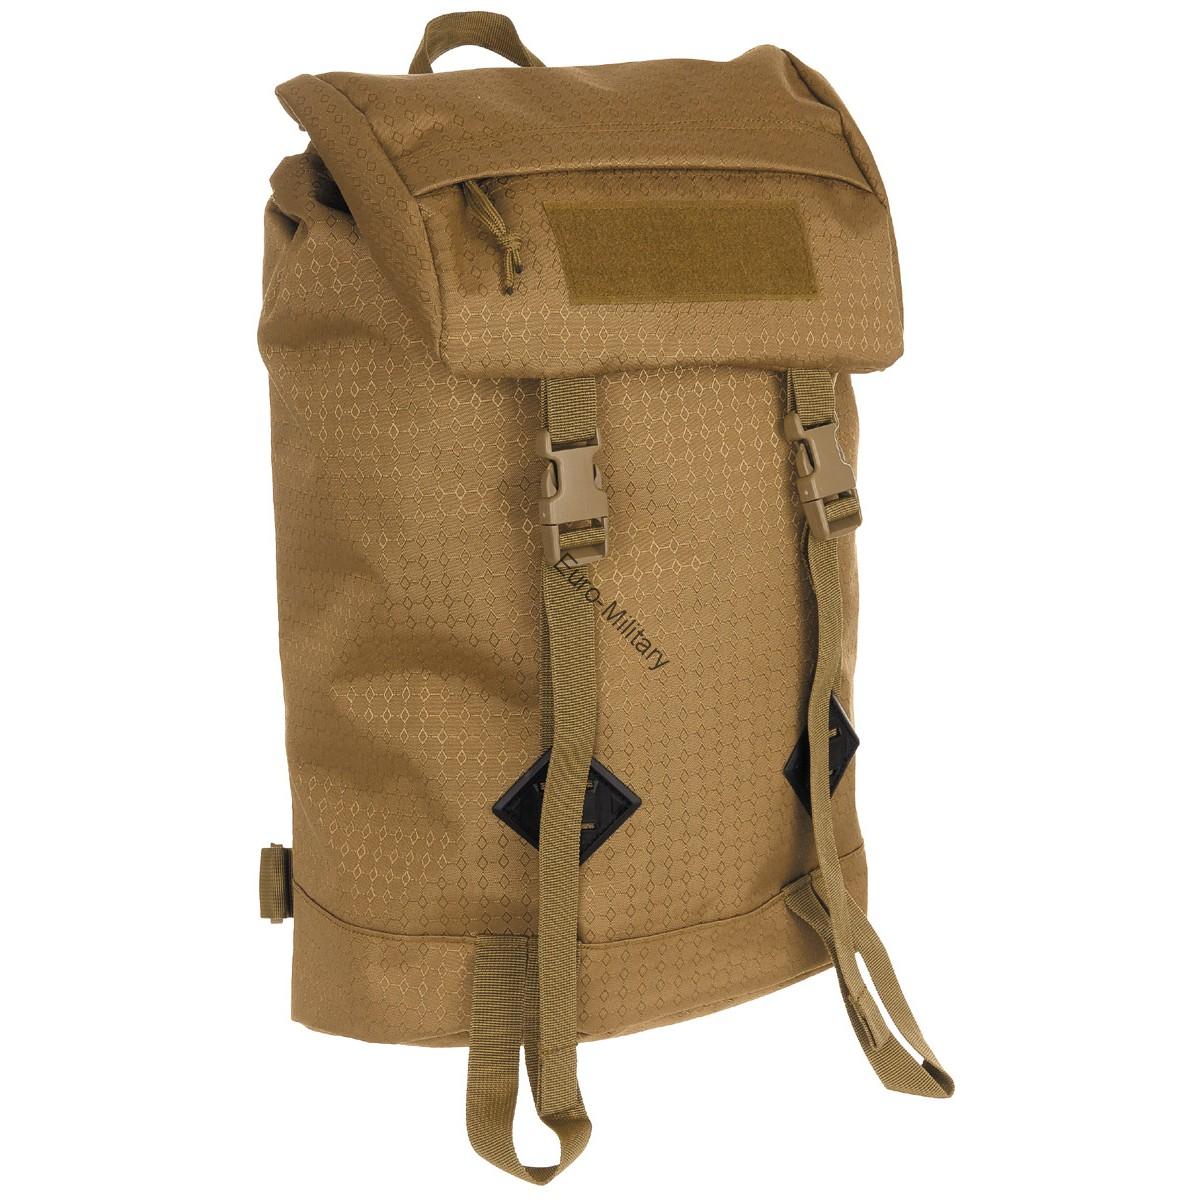 Stylish Outdoor City Backpack Bag "Bote" OctaTac 25L - Coyote